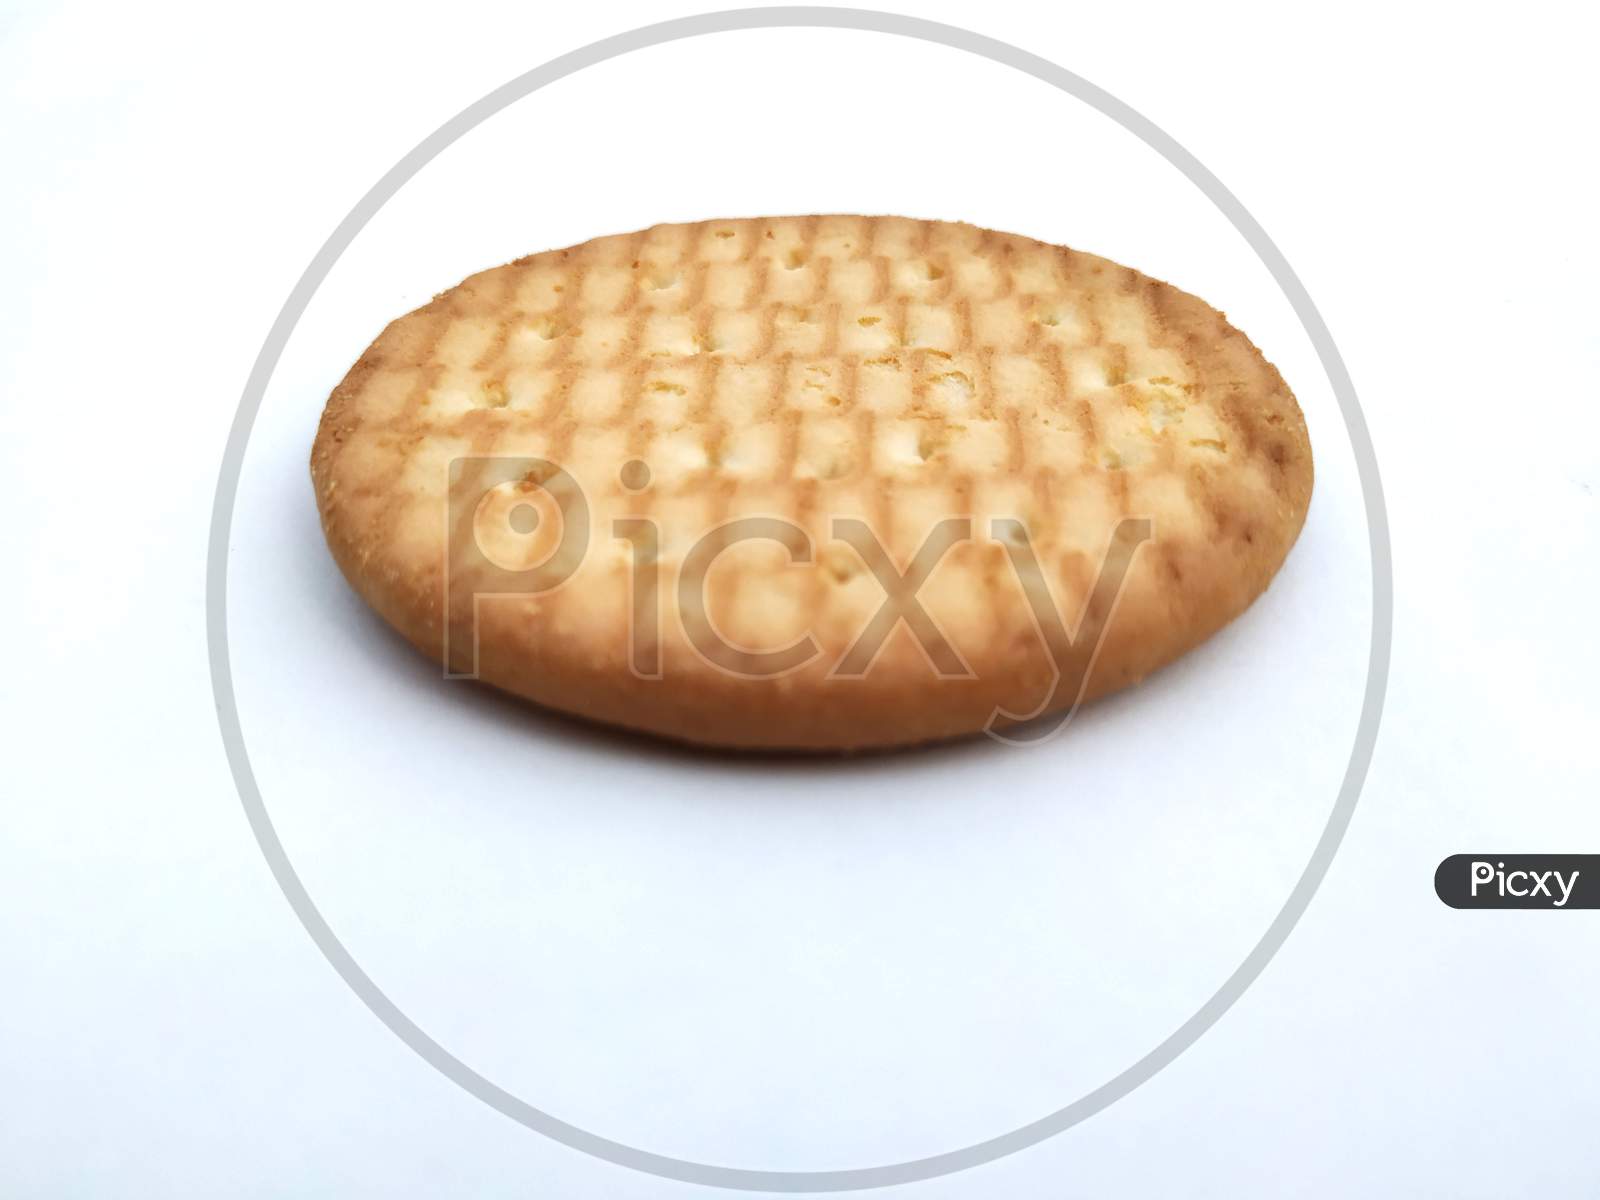 Digestive whole wheat round biscuits isolated on white back ground